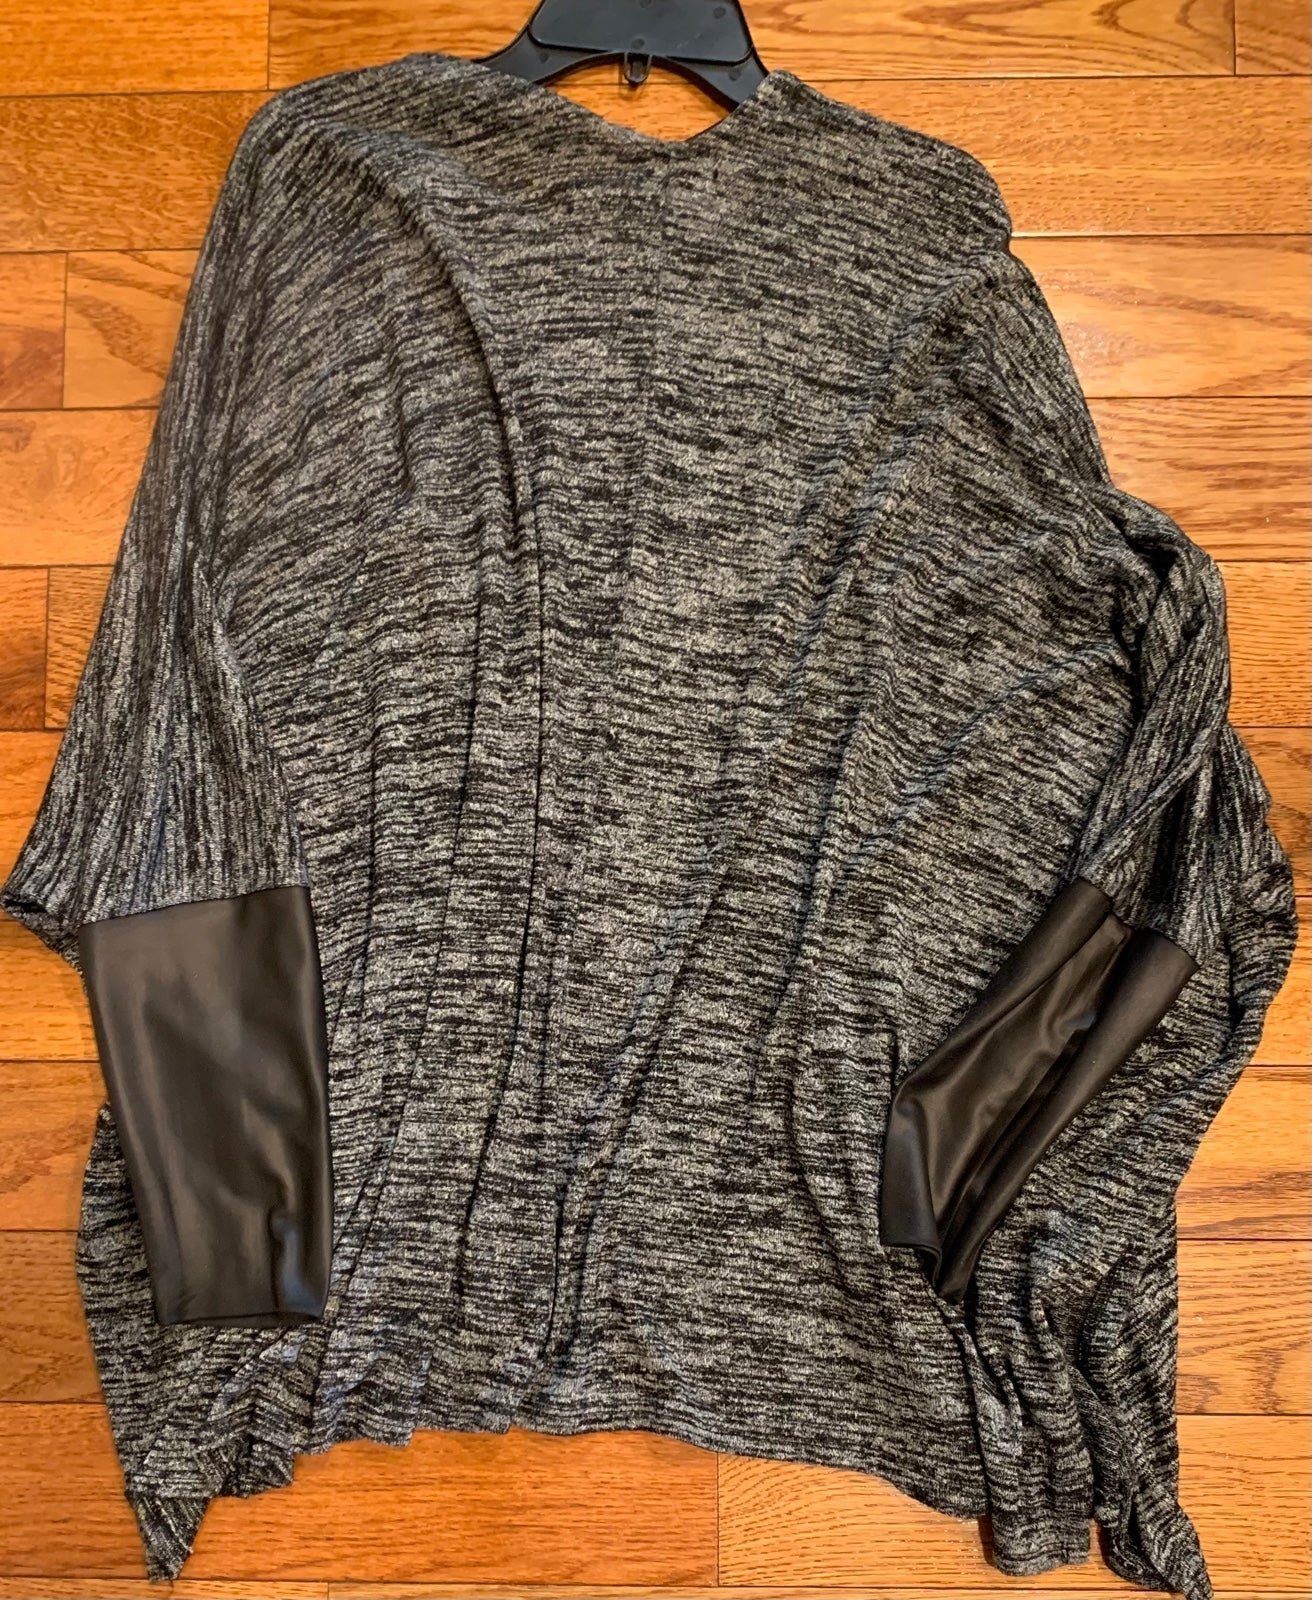 DKNY Jeans Black and Grey Open Waterfall Cardigan Faux Leather Sleeve Womens M AXRFAXoyV